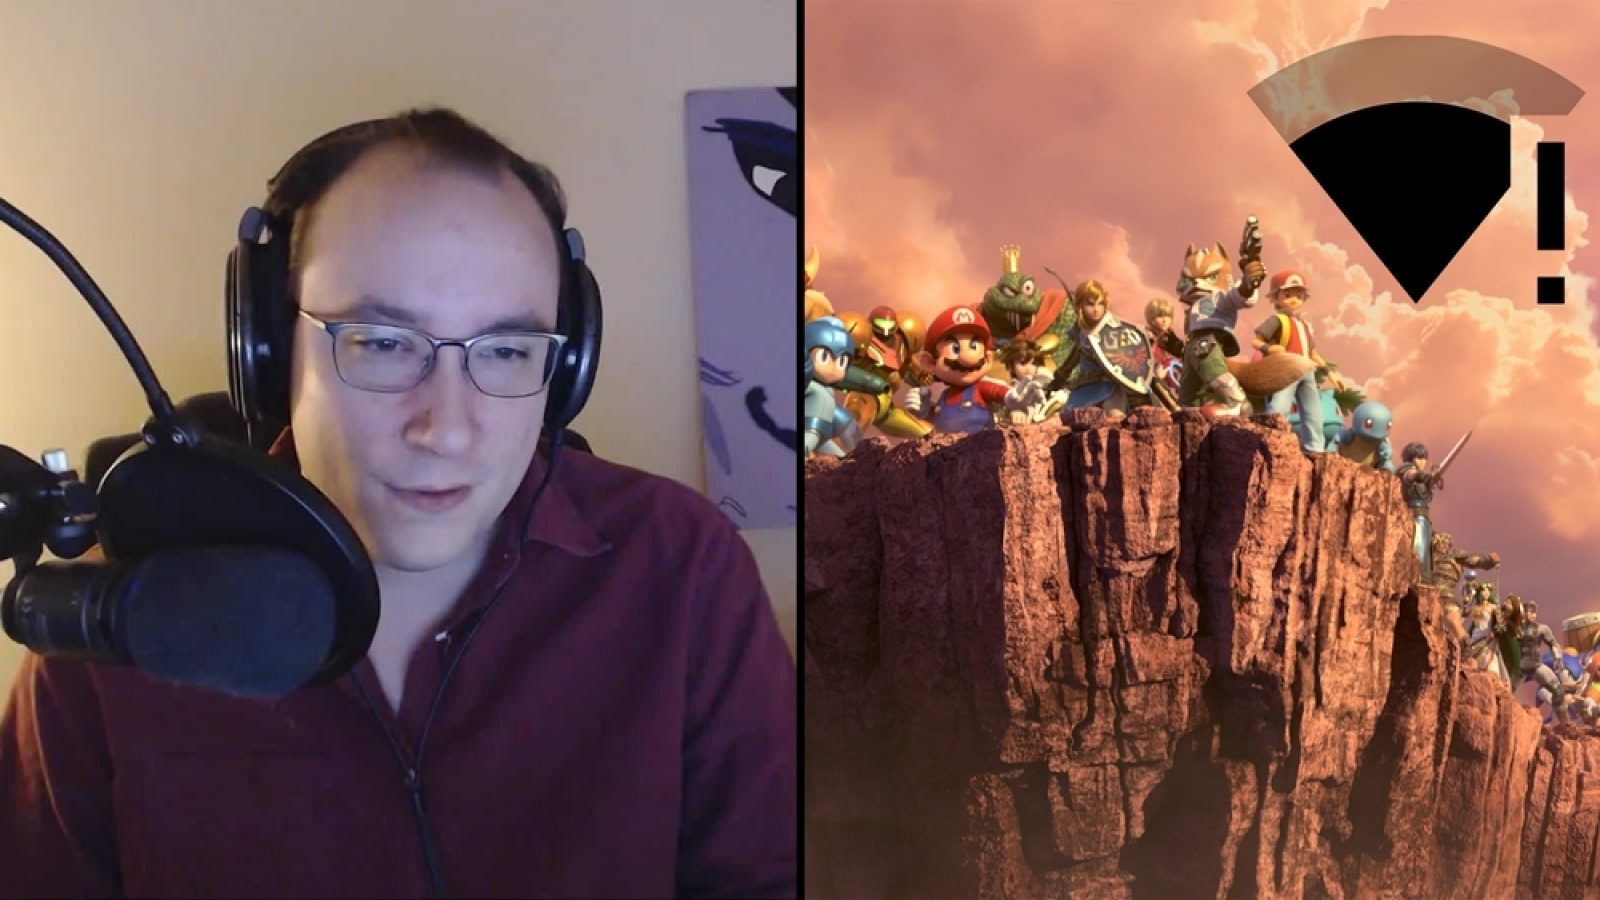 Fatality's Twitch chat wins online Super Smash Bros. Ultimate